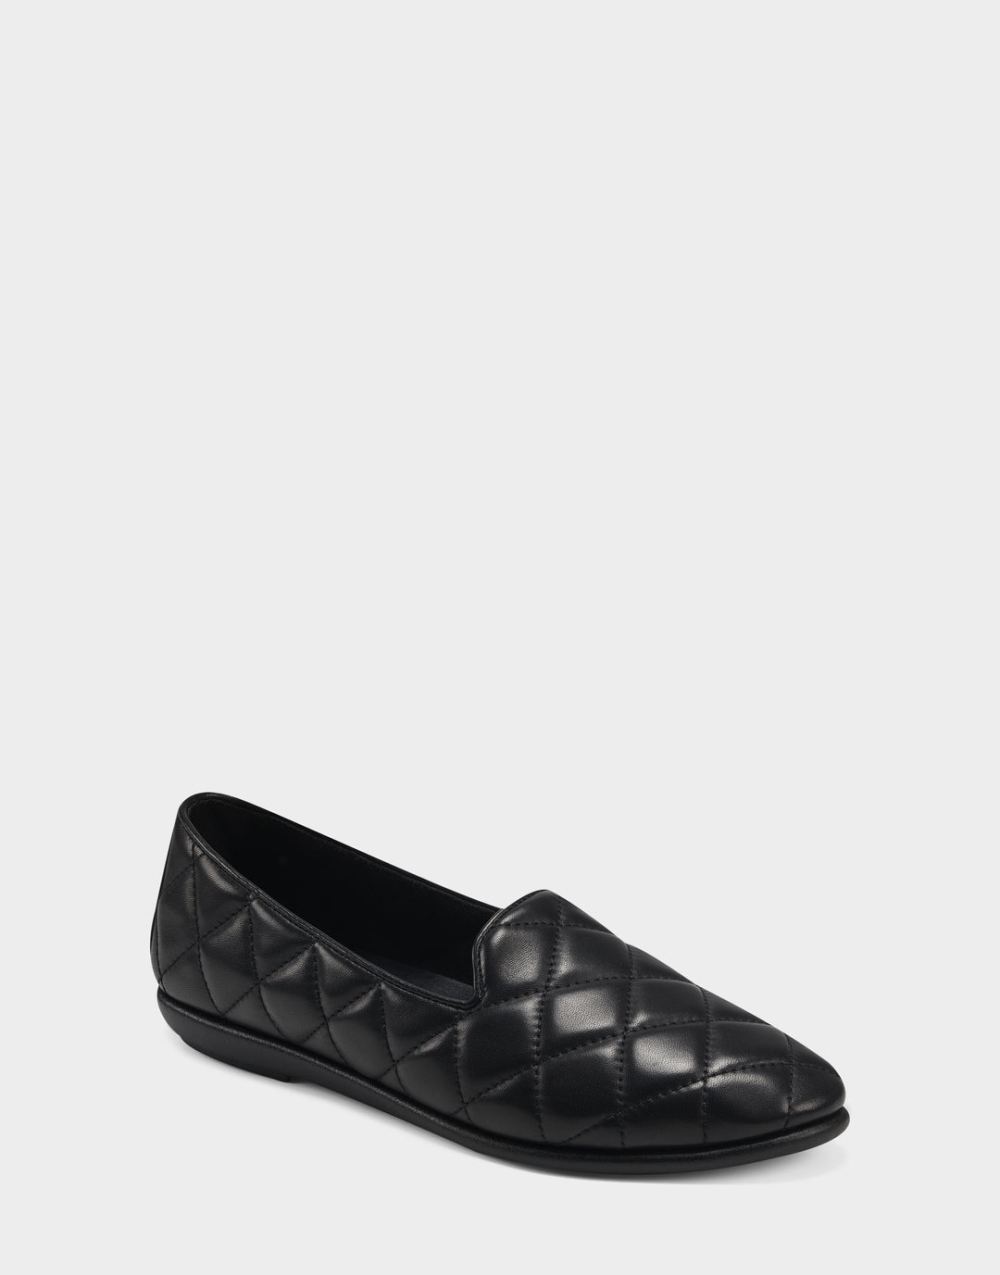 Women's | Betunia Black Quilted Genuine Leather Loafer